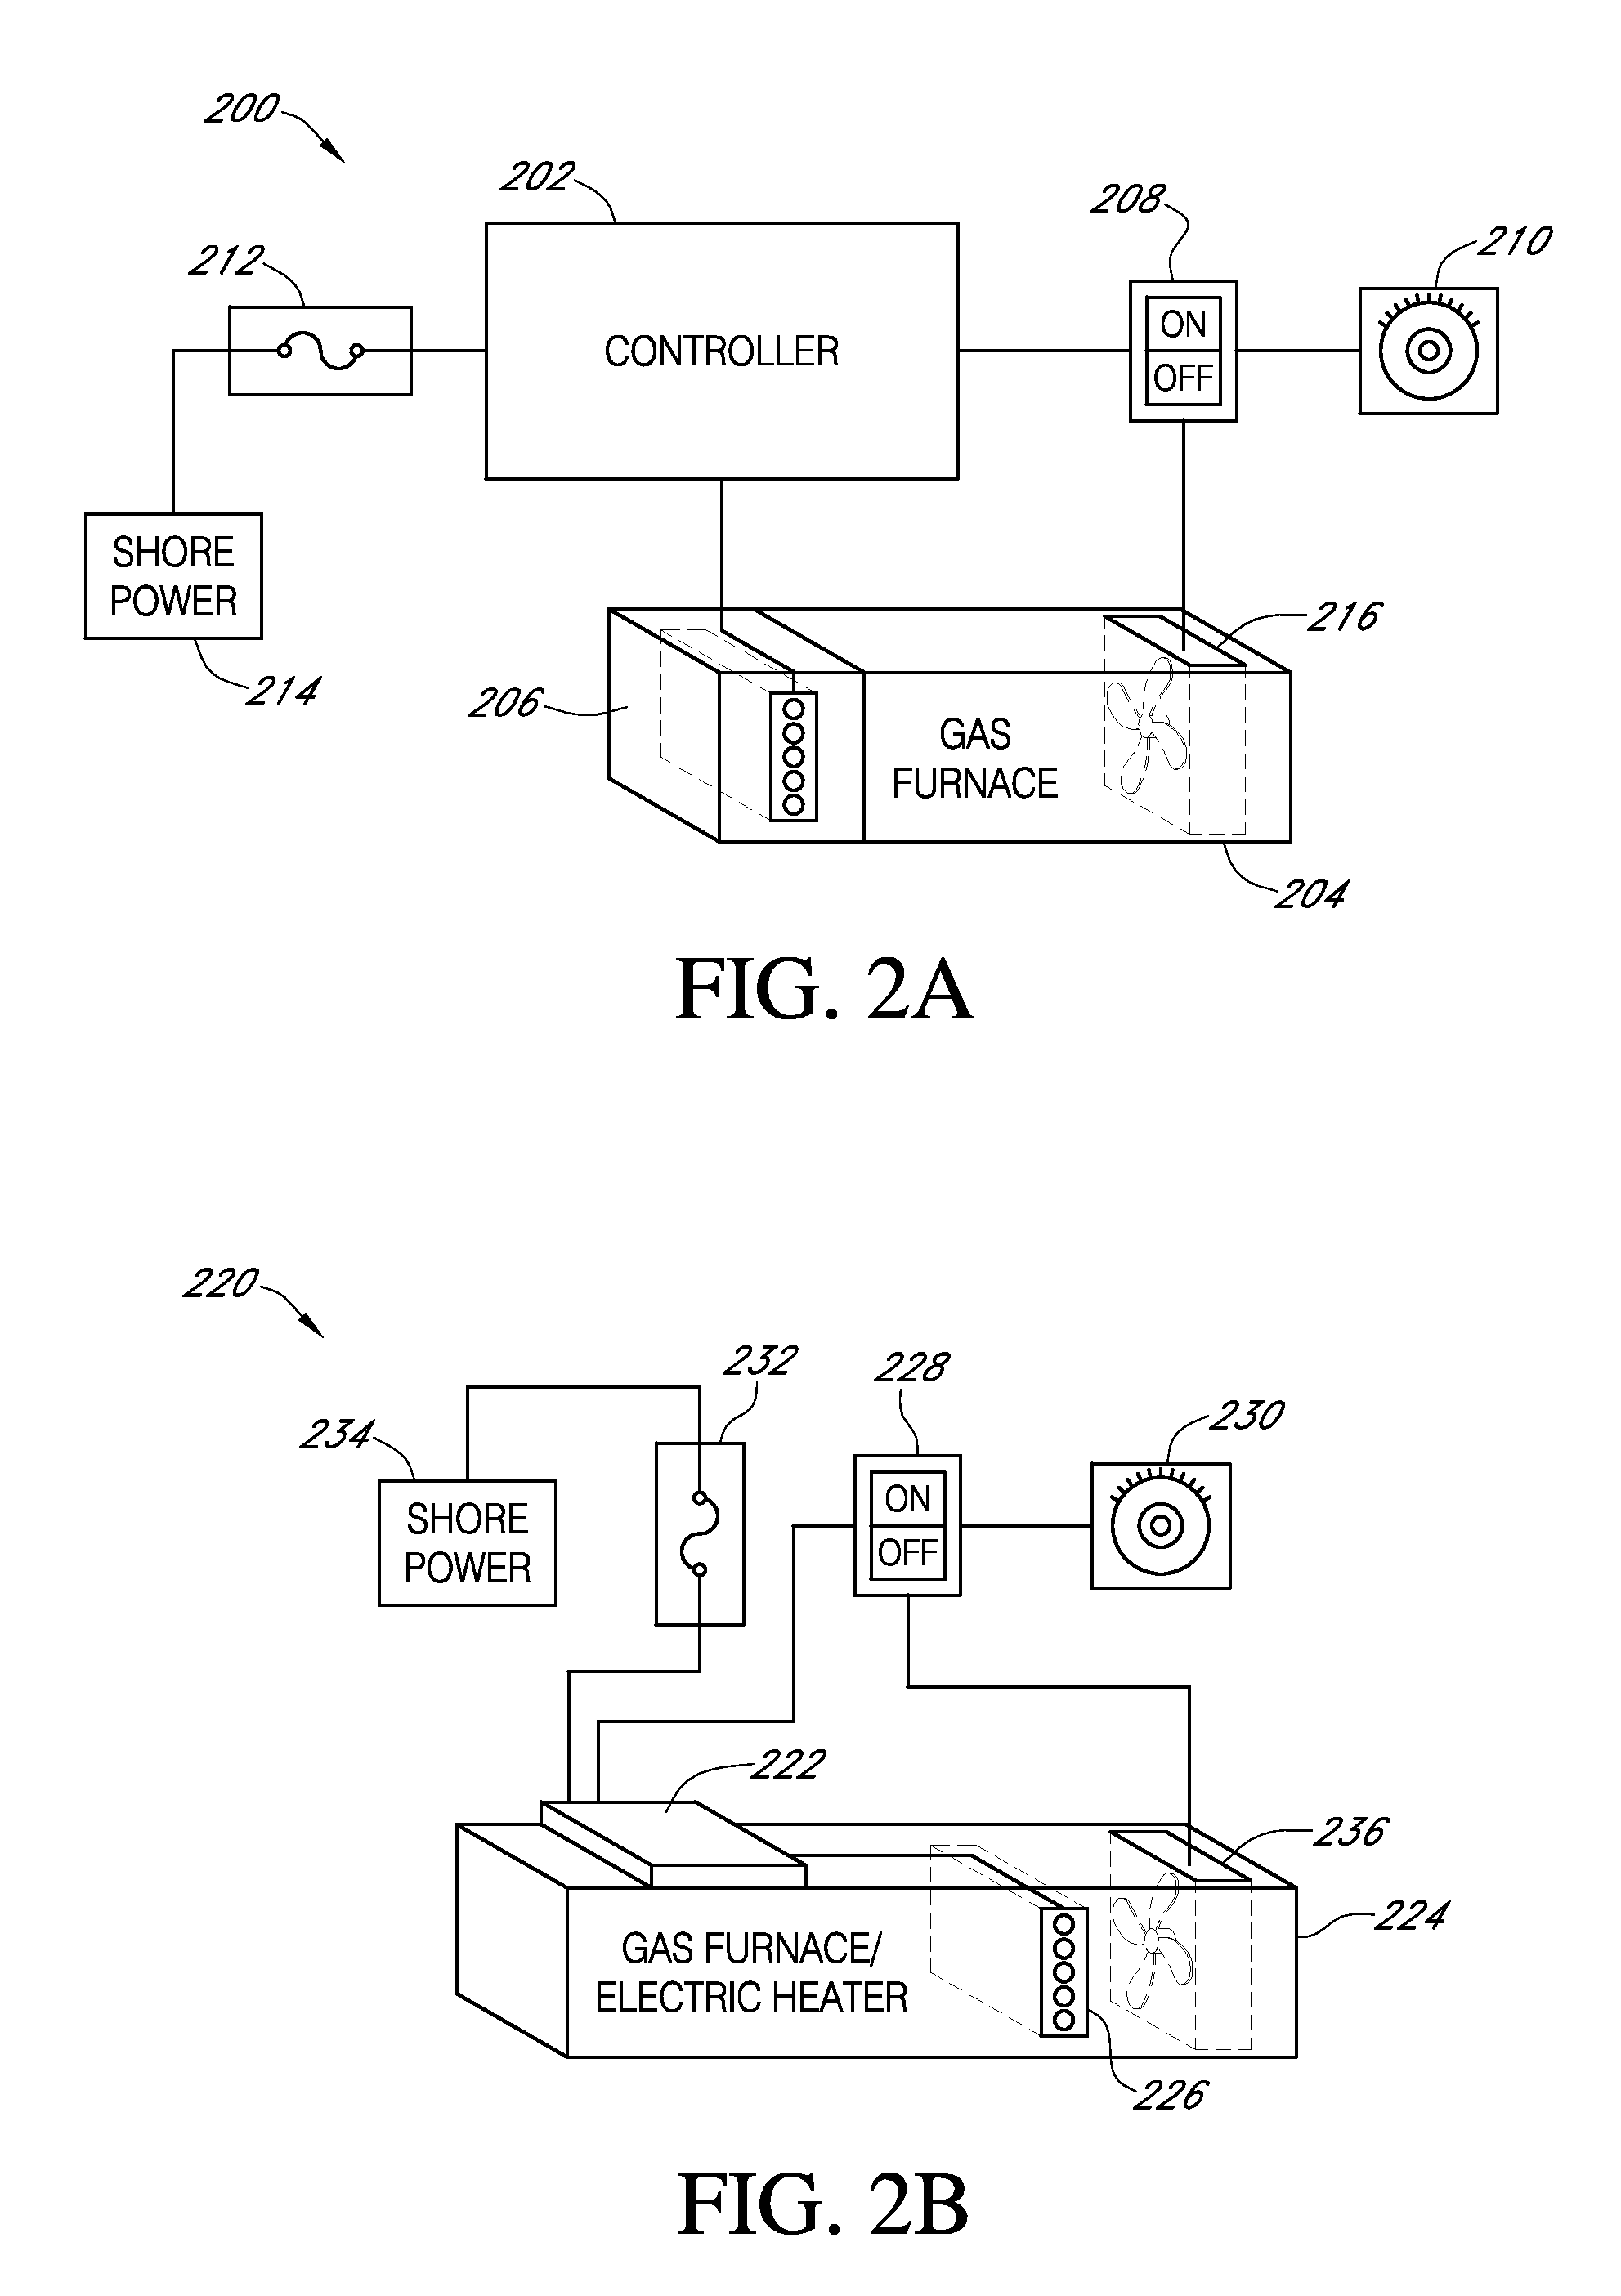 Systems and methods for controlling an adaptive heating system with exchangeable heat sources